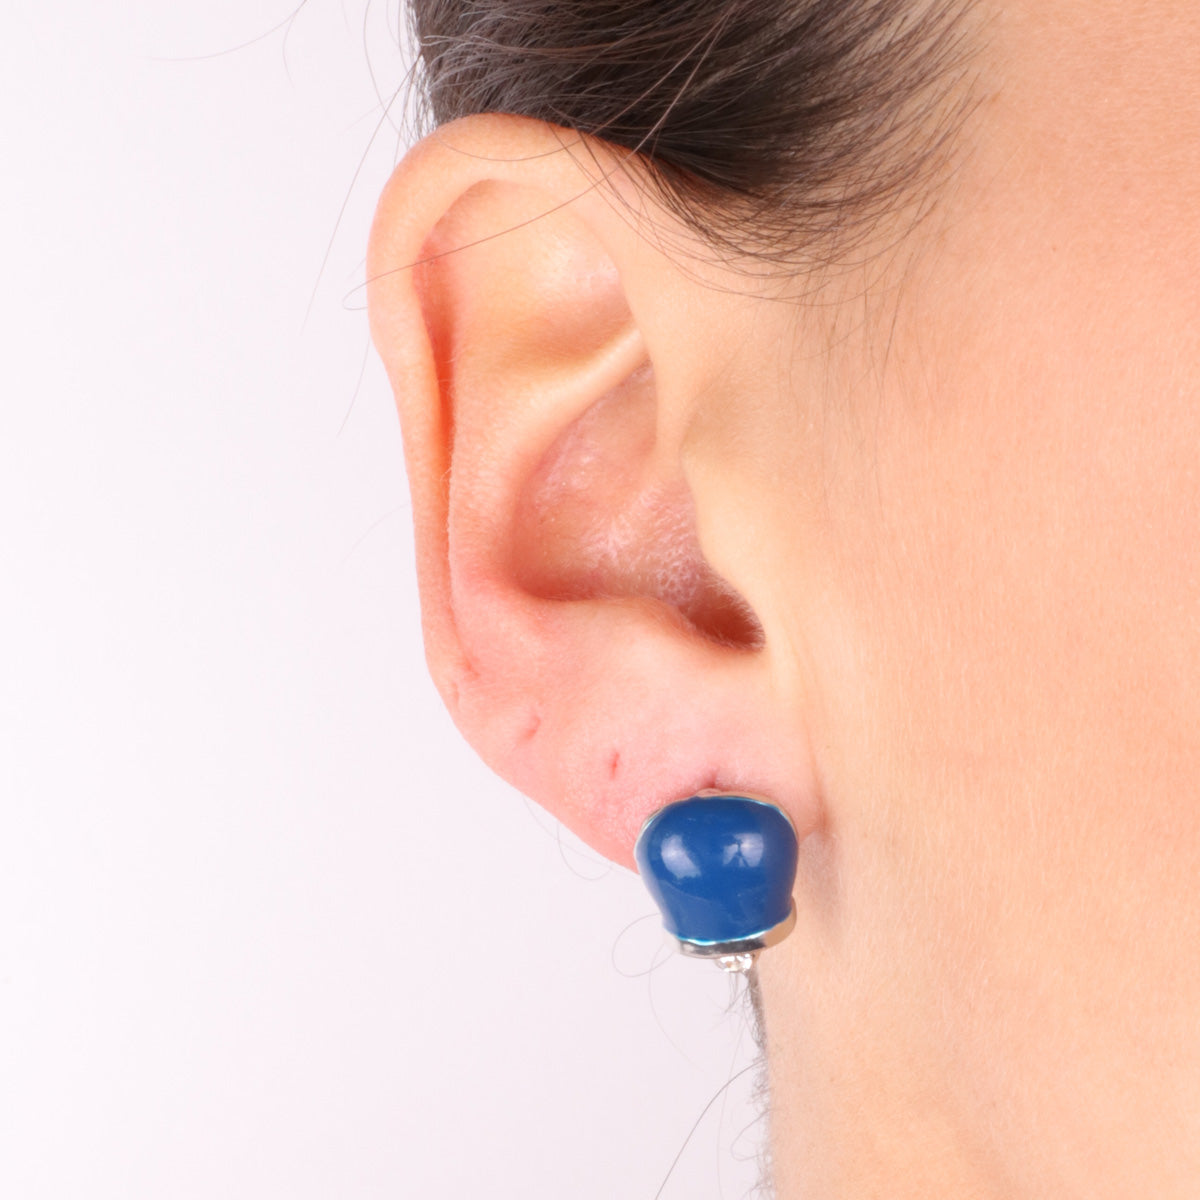 Metal earrings in the shape of a charming bell with blue enamels and crystals